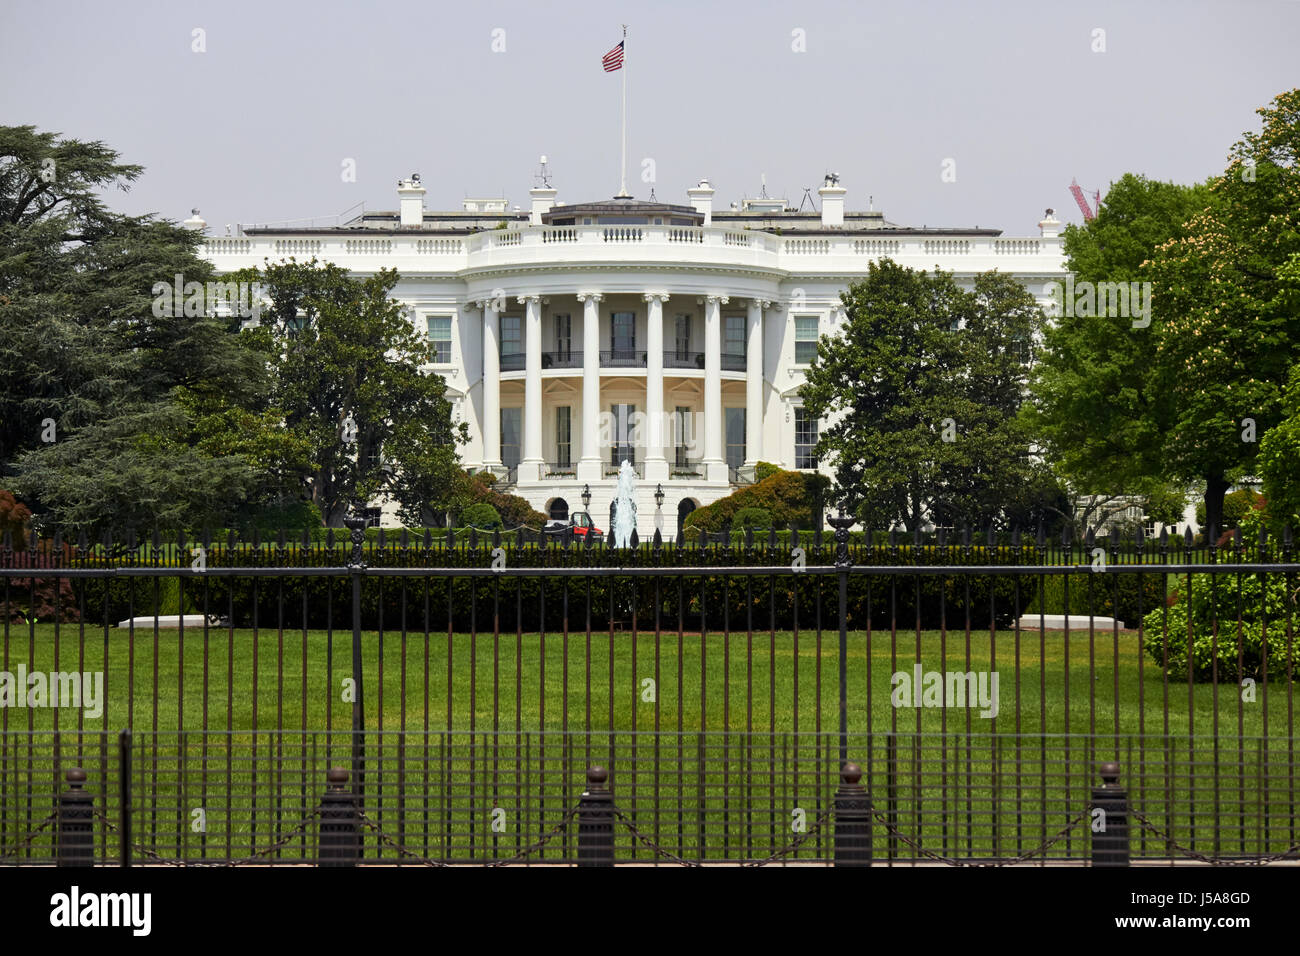 security fencing outside the southern facade of the white house Washington DC USA Stock Photo